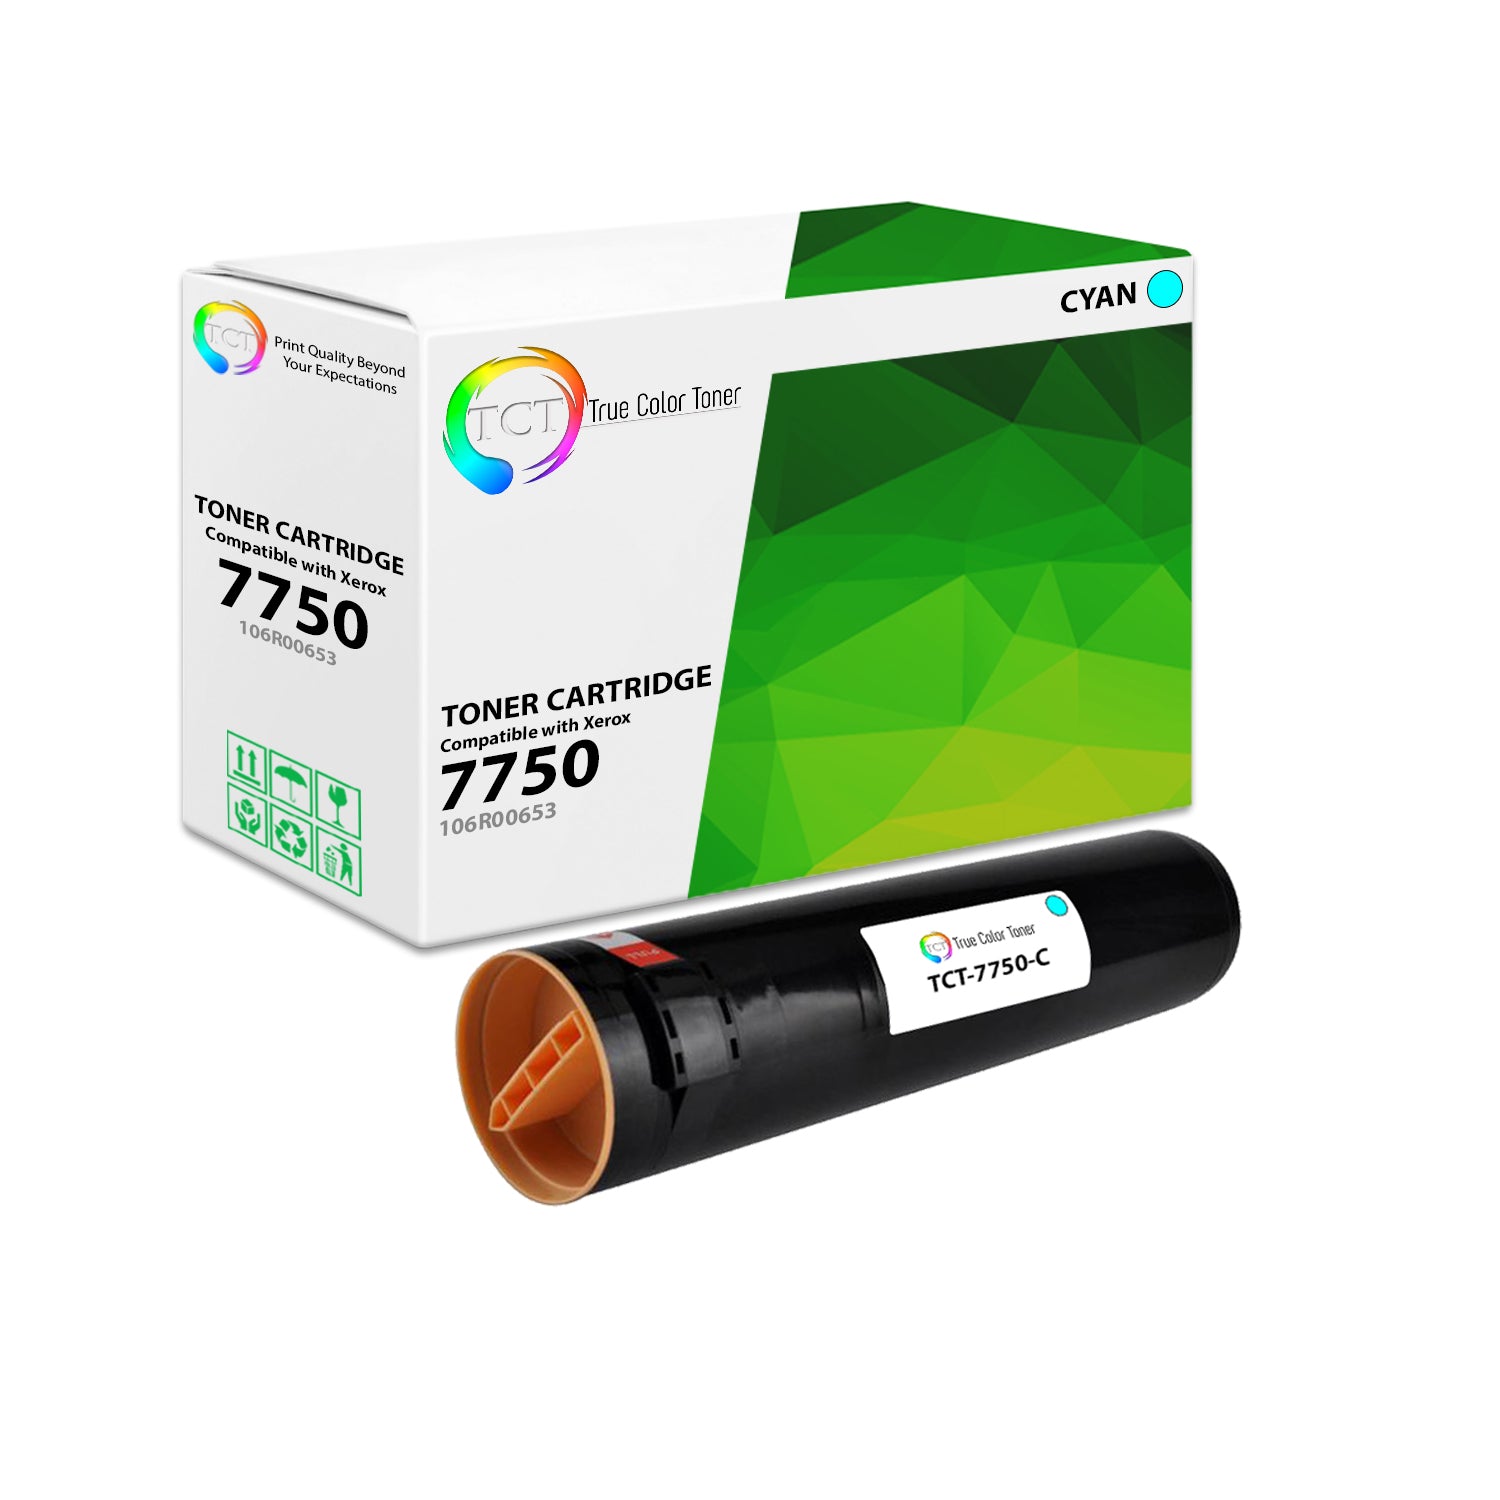 TCT Compatible Toner Cartridge Replacement for the Xerox 7750 Series - 1 Pack Cyan